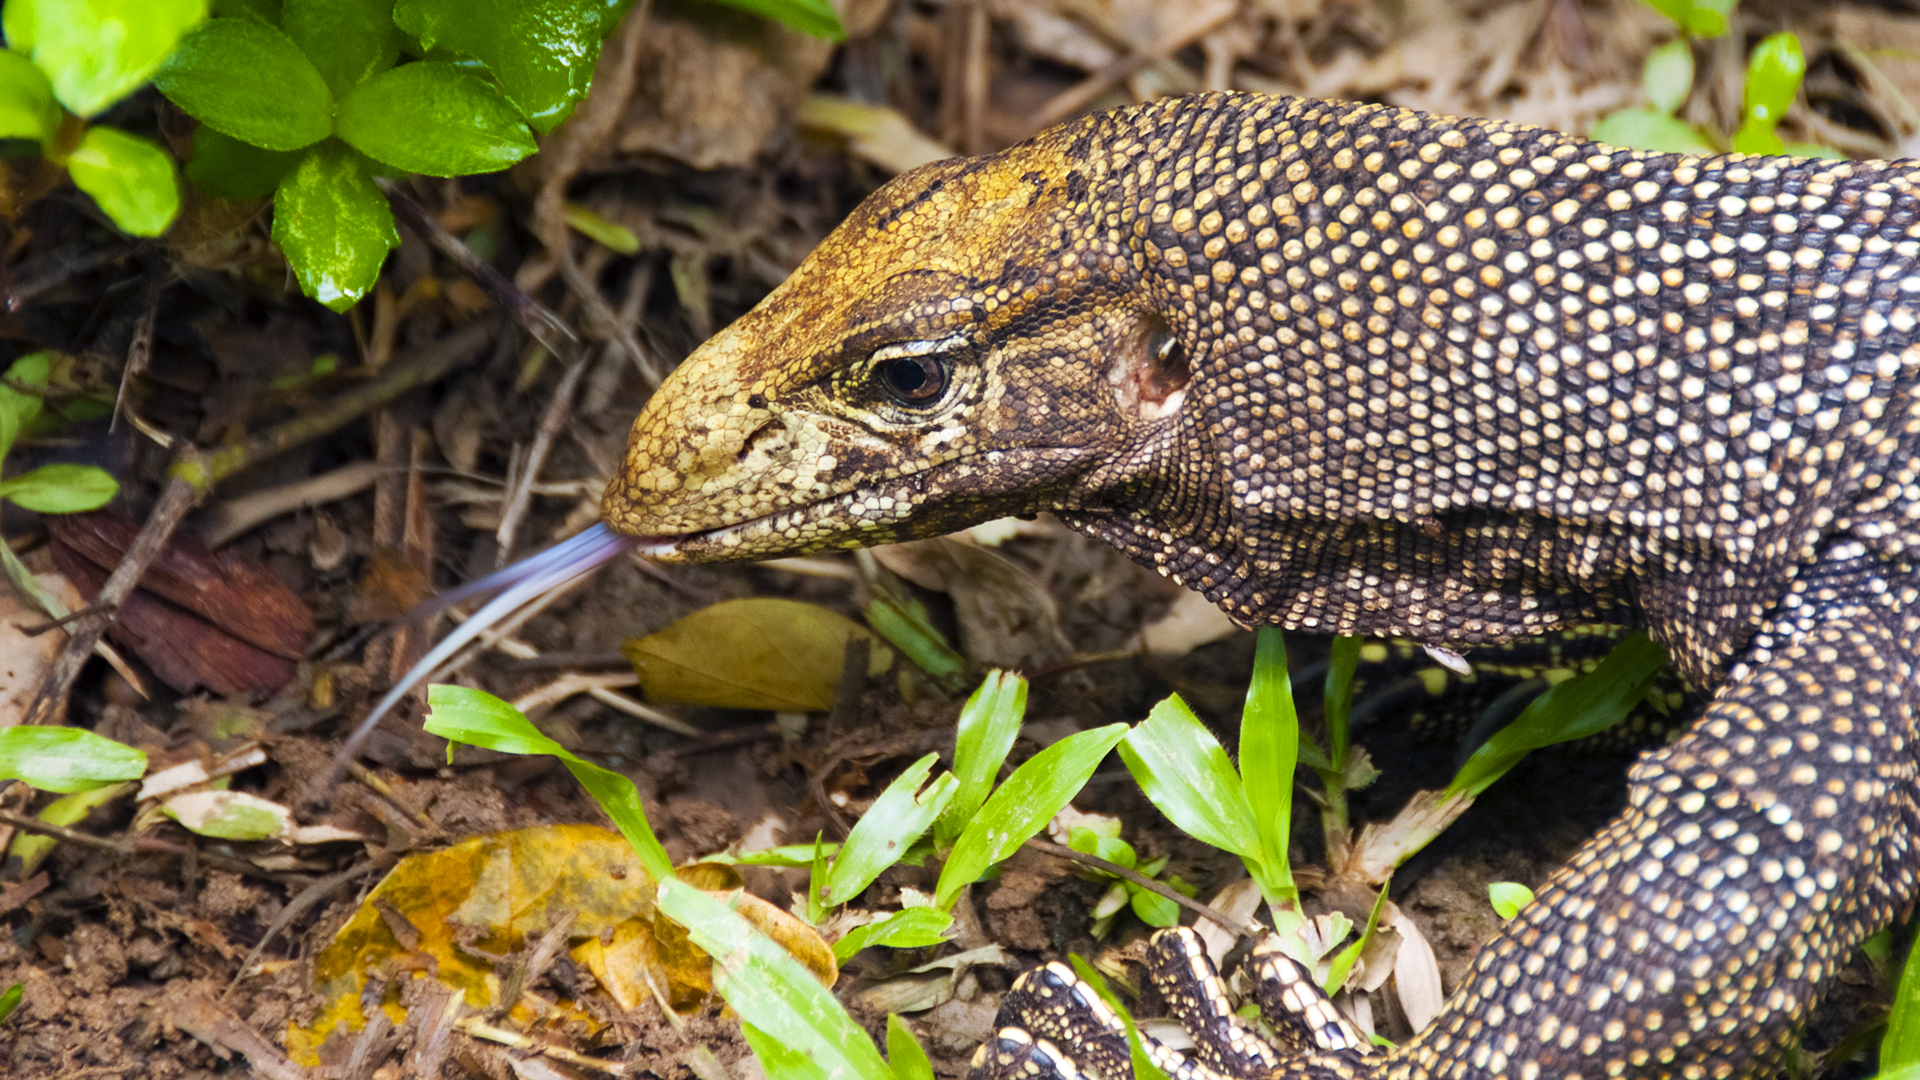 Clouded monitor lizard foraging